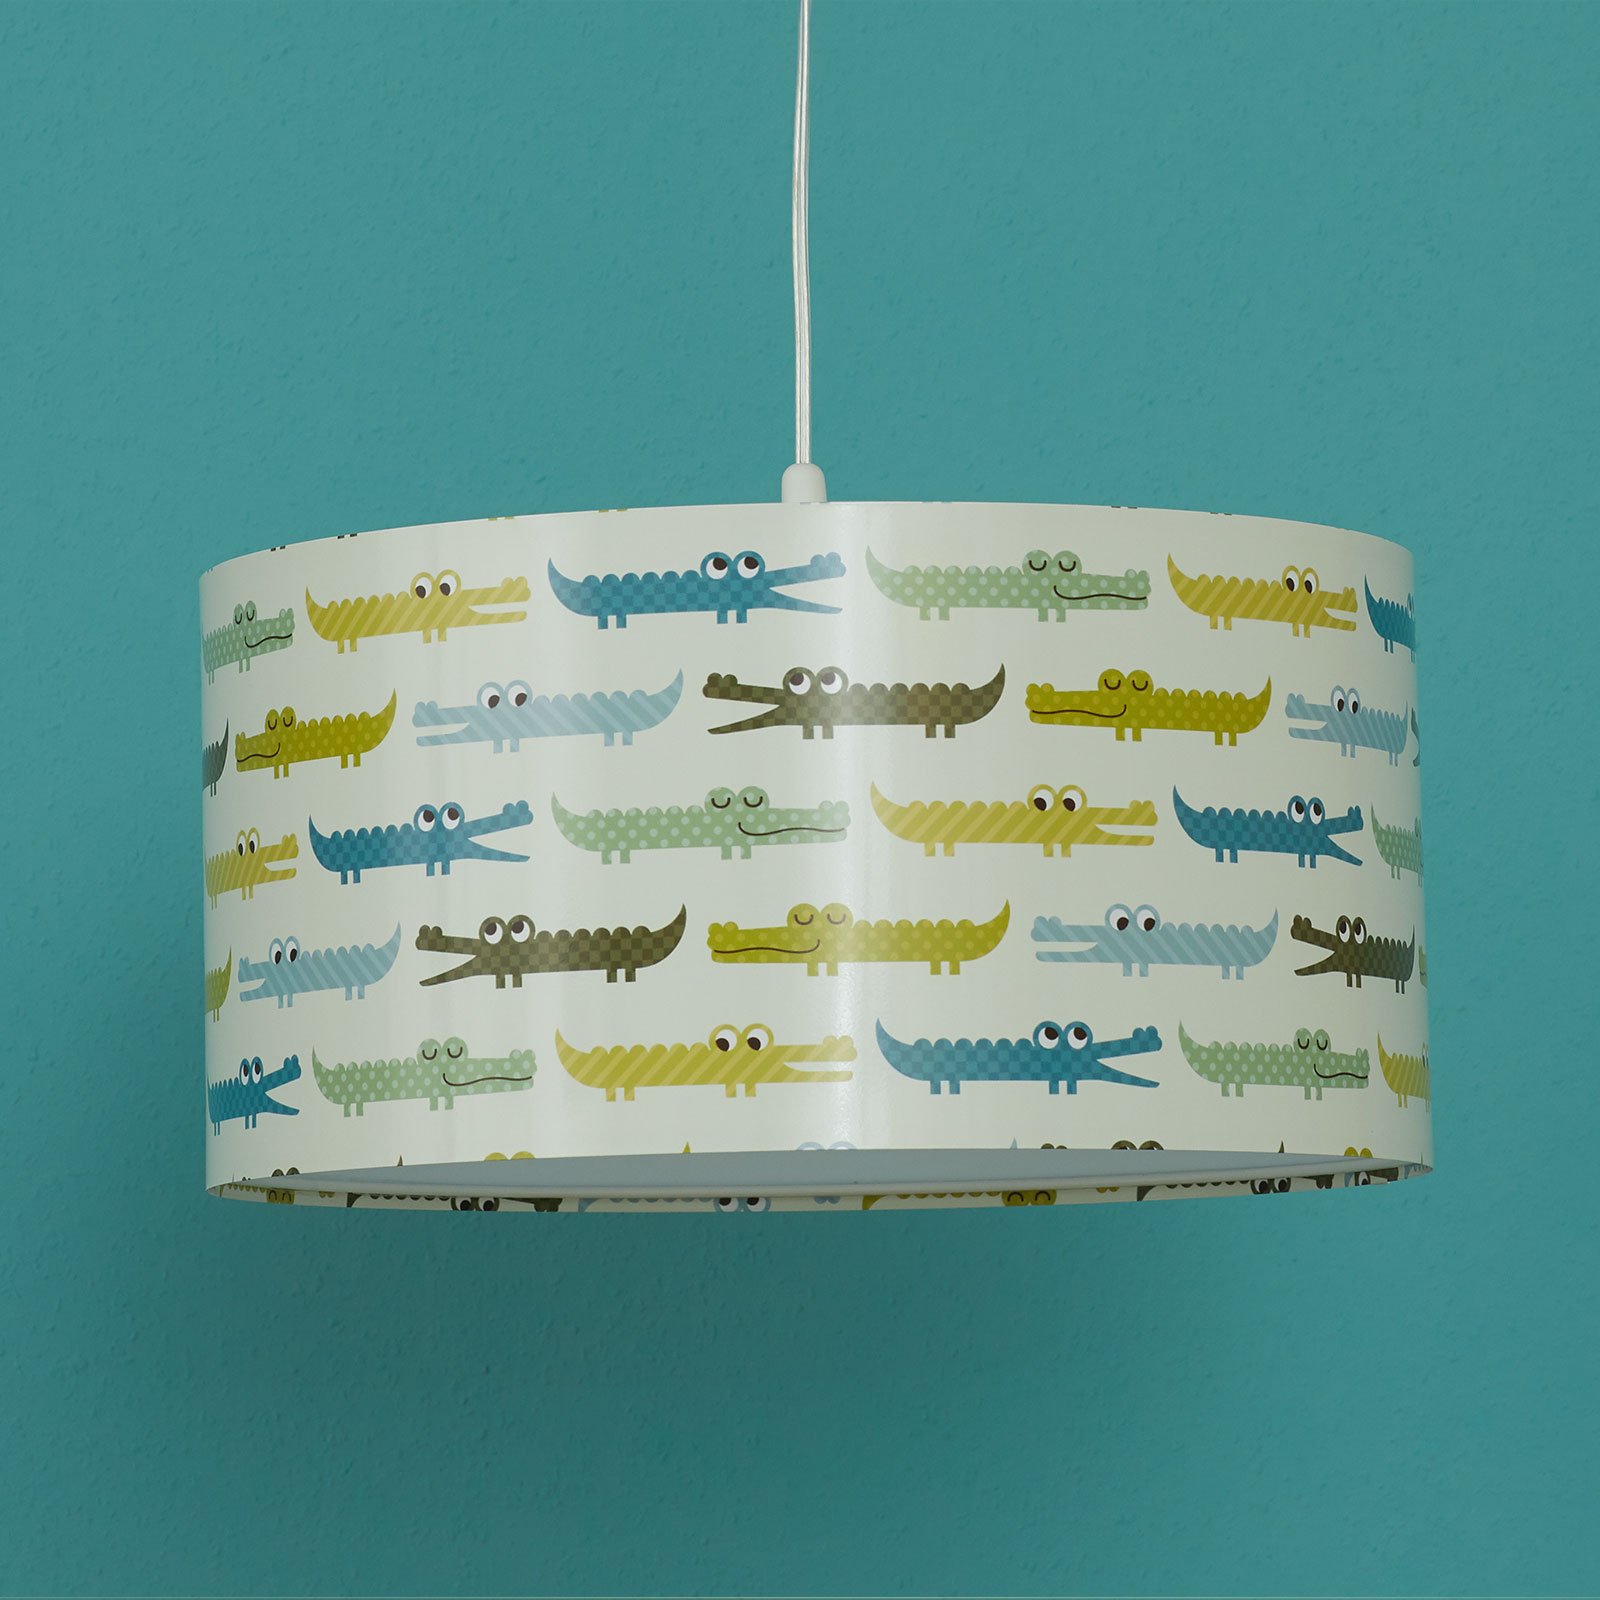 Children's hanging light Kroko with colourful motif